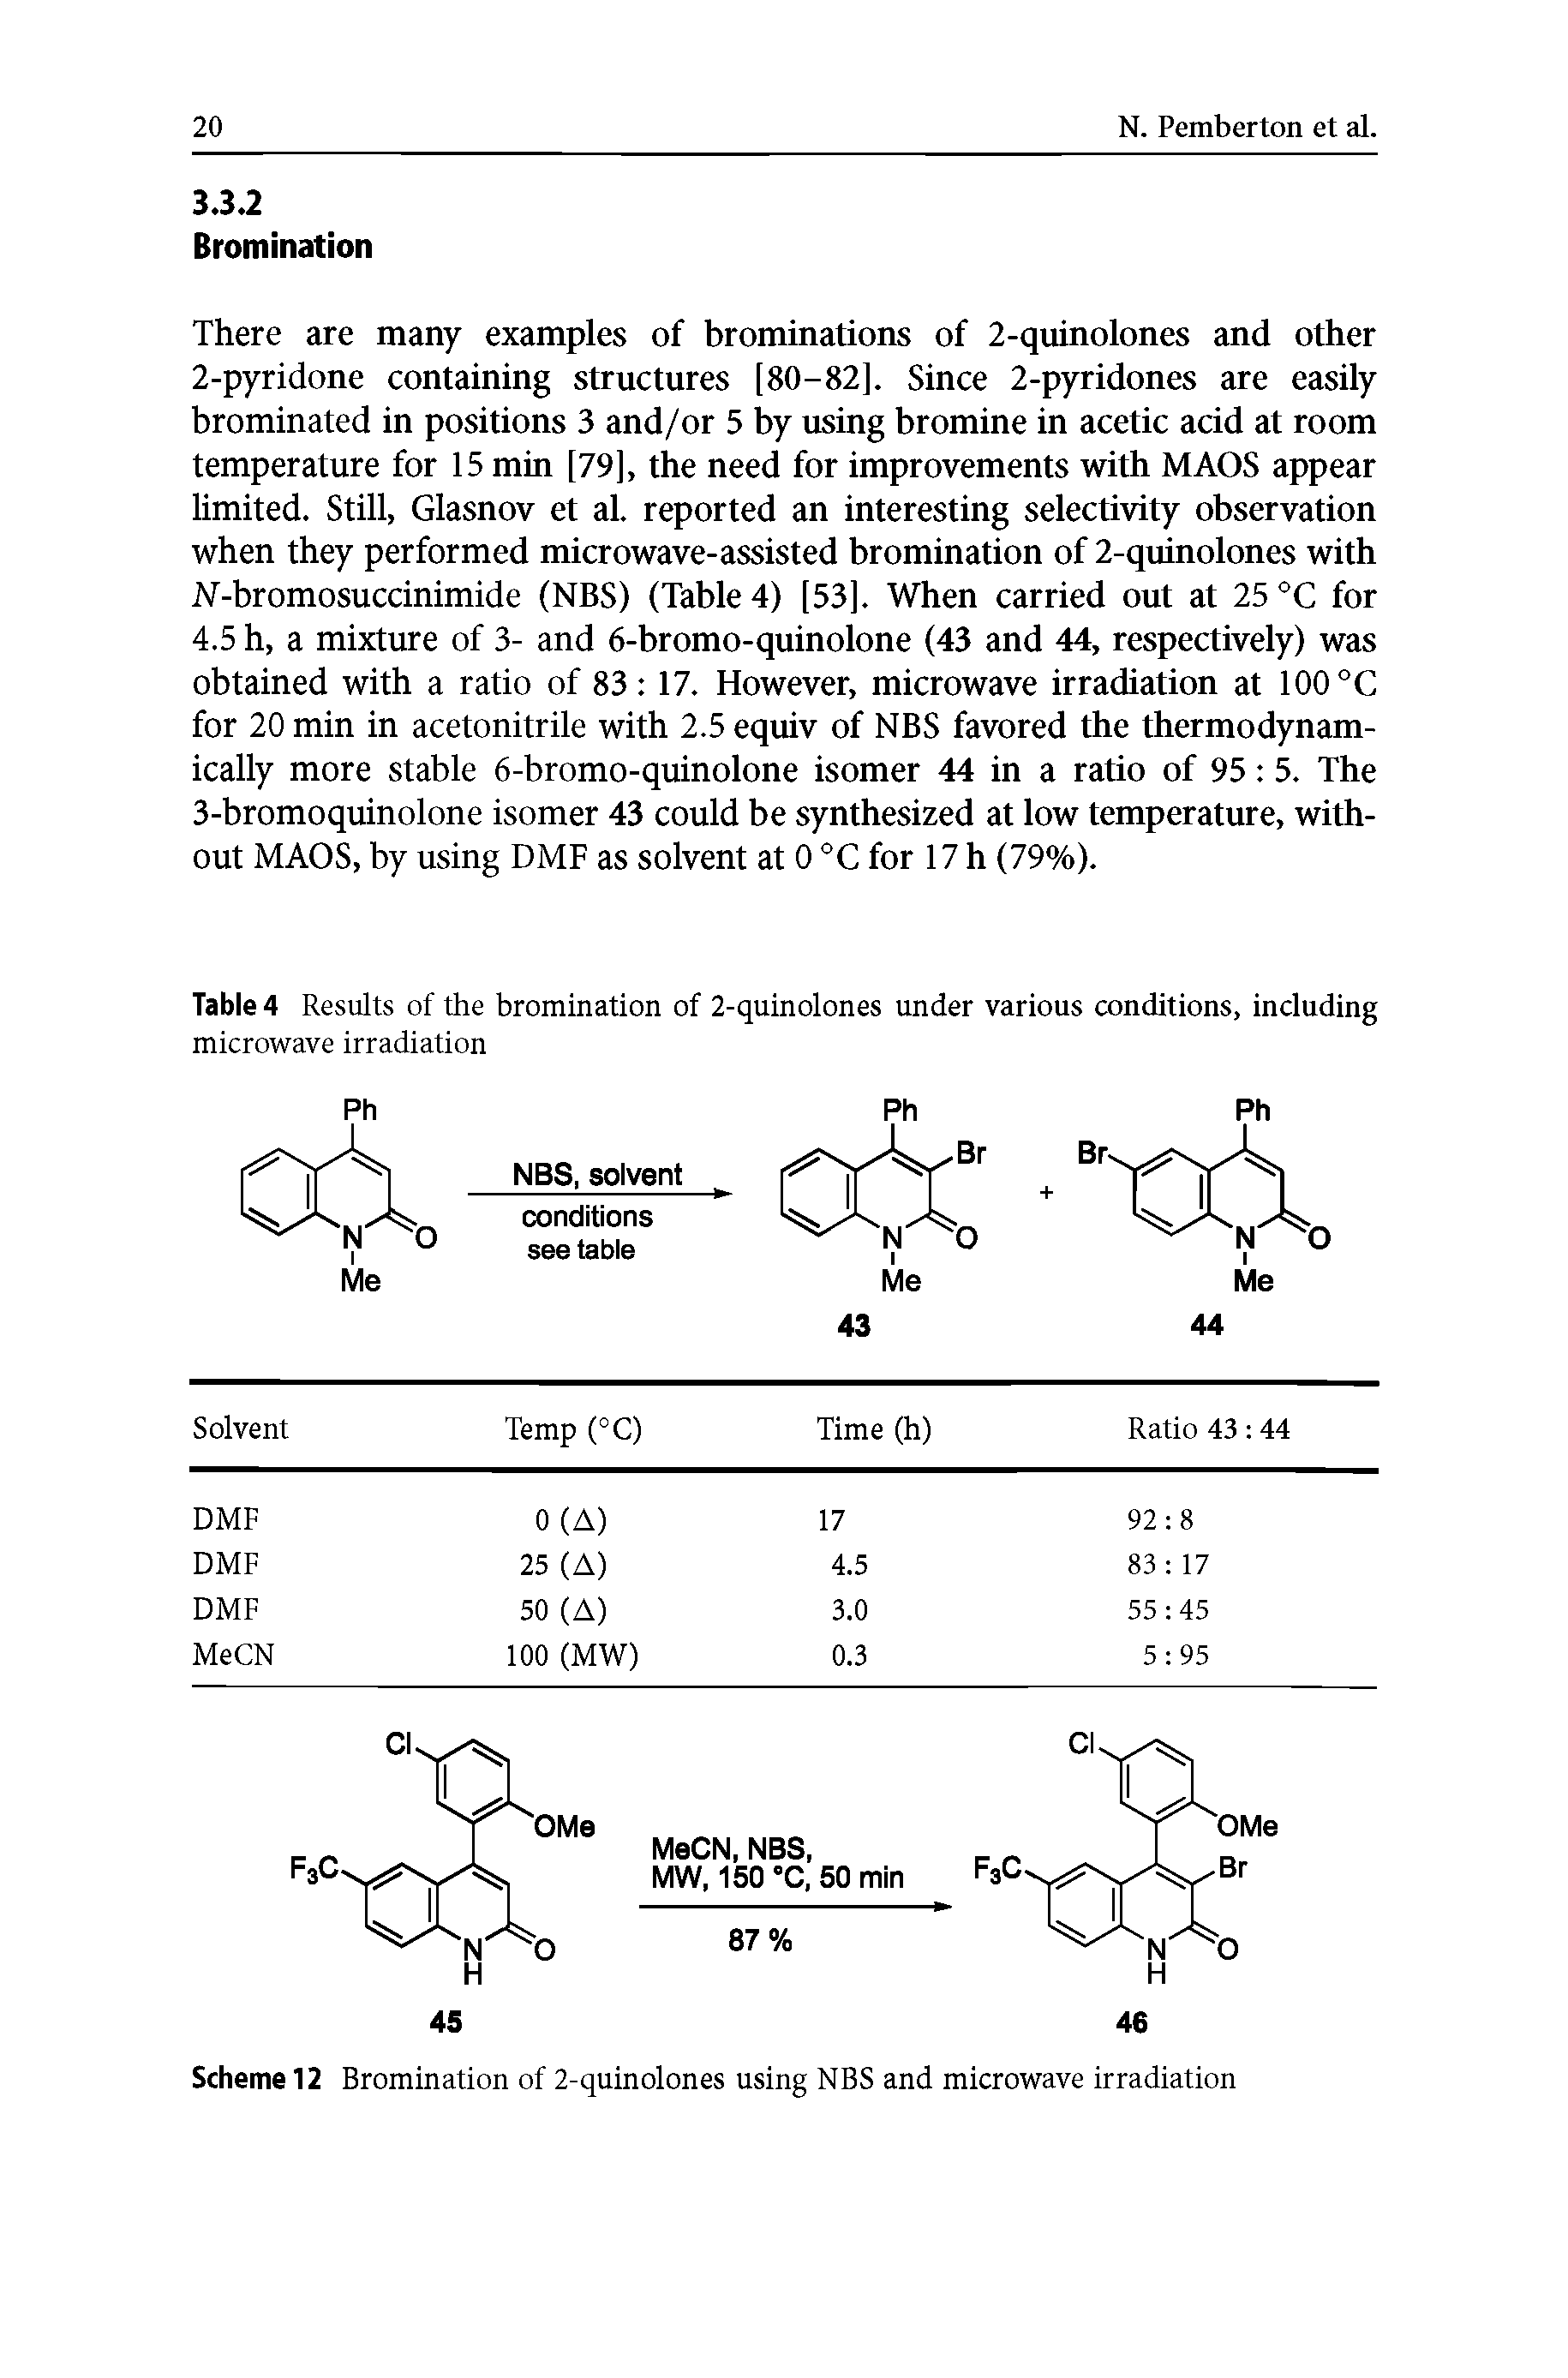 Table 4 Results of the bromination of 2-quinolones under various conditions, including...